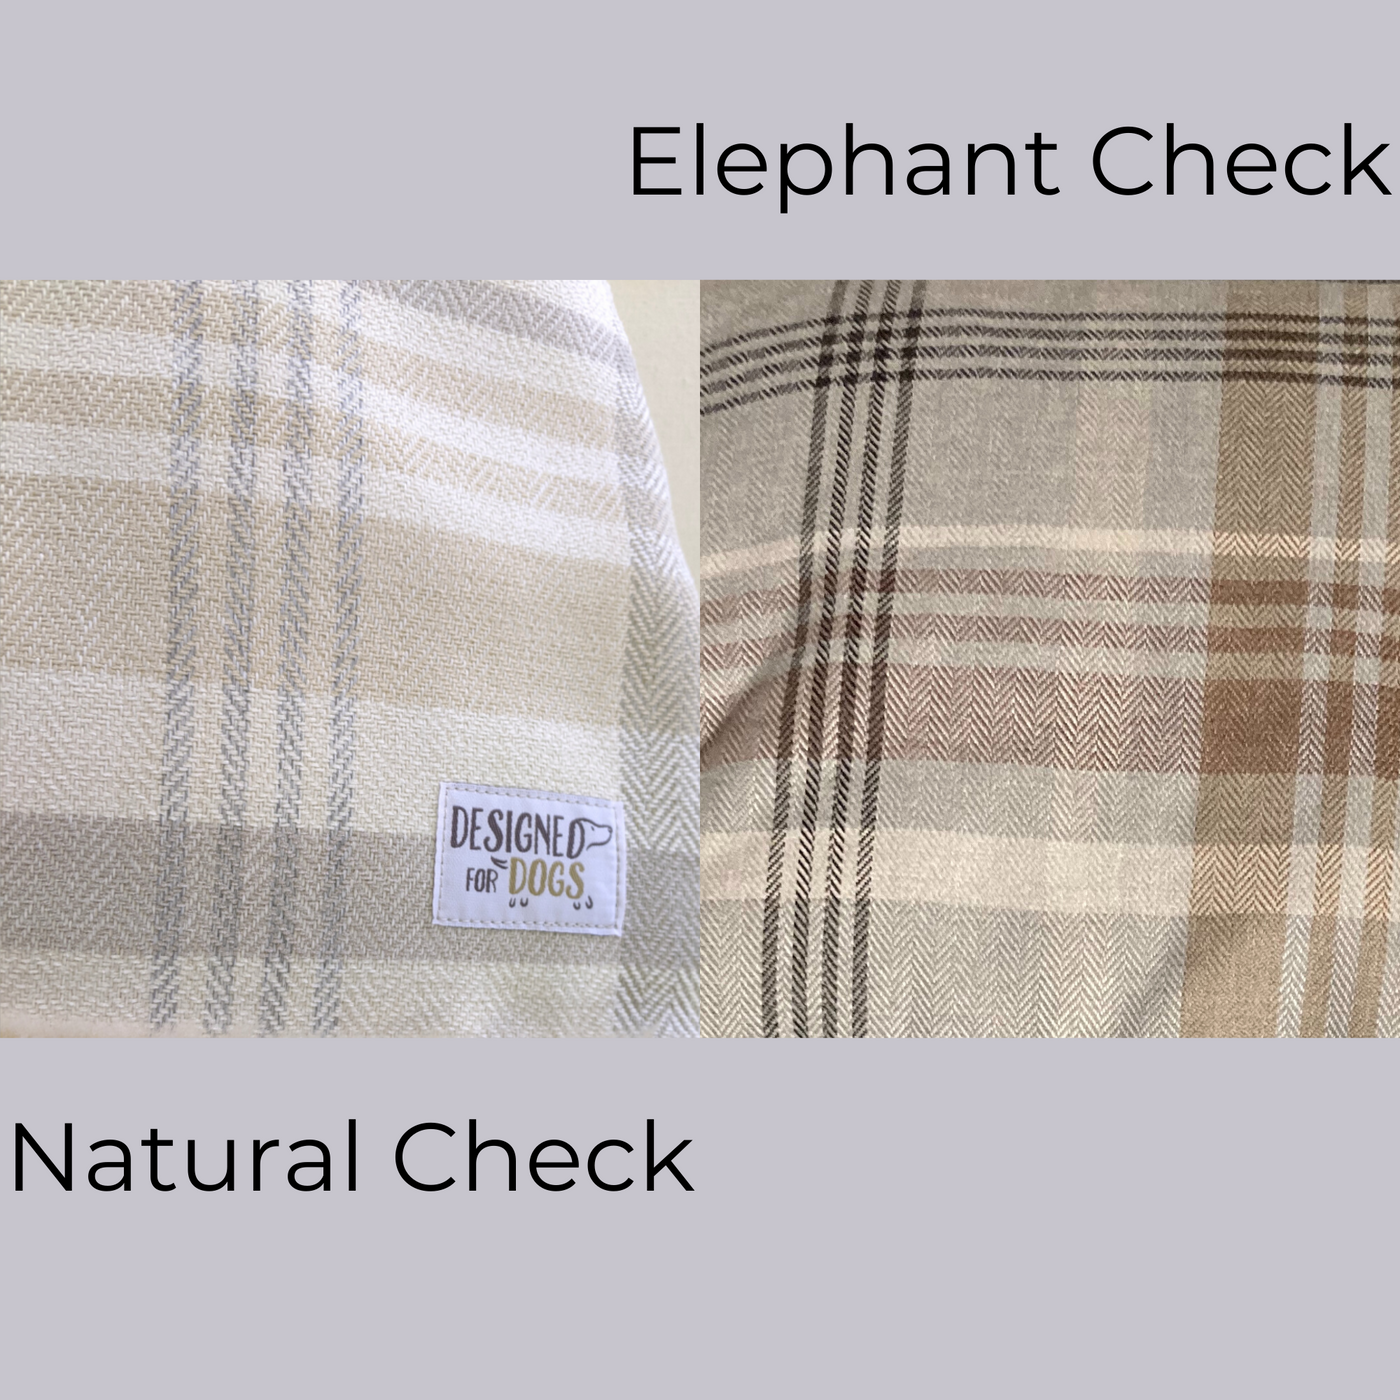 Elephant Check Doggy Den Bed